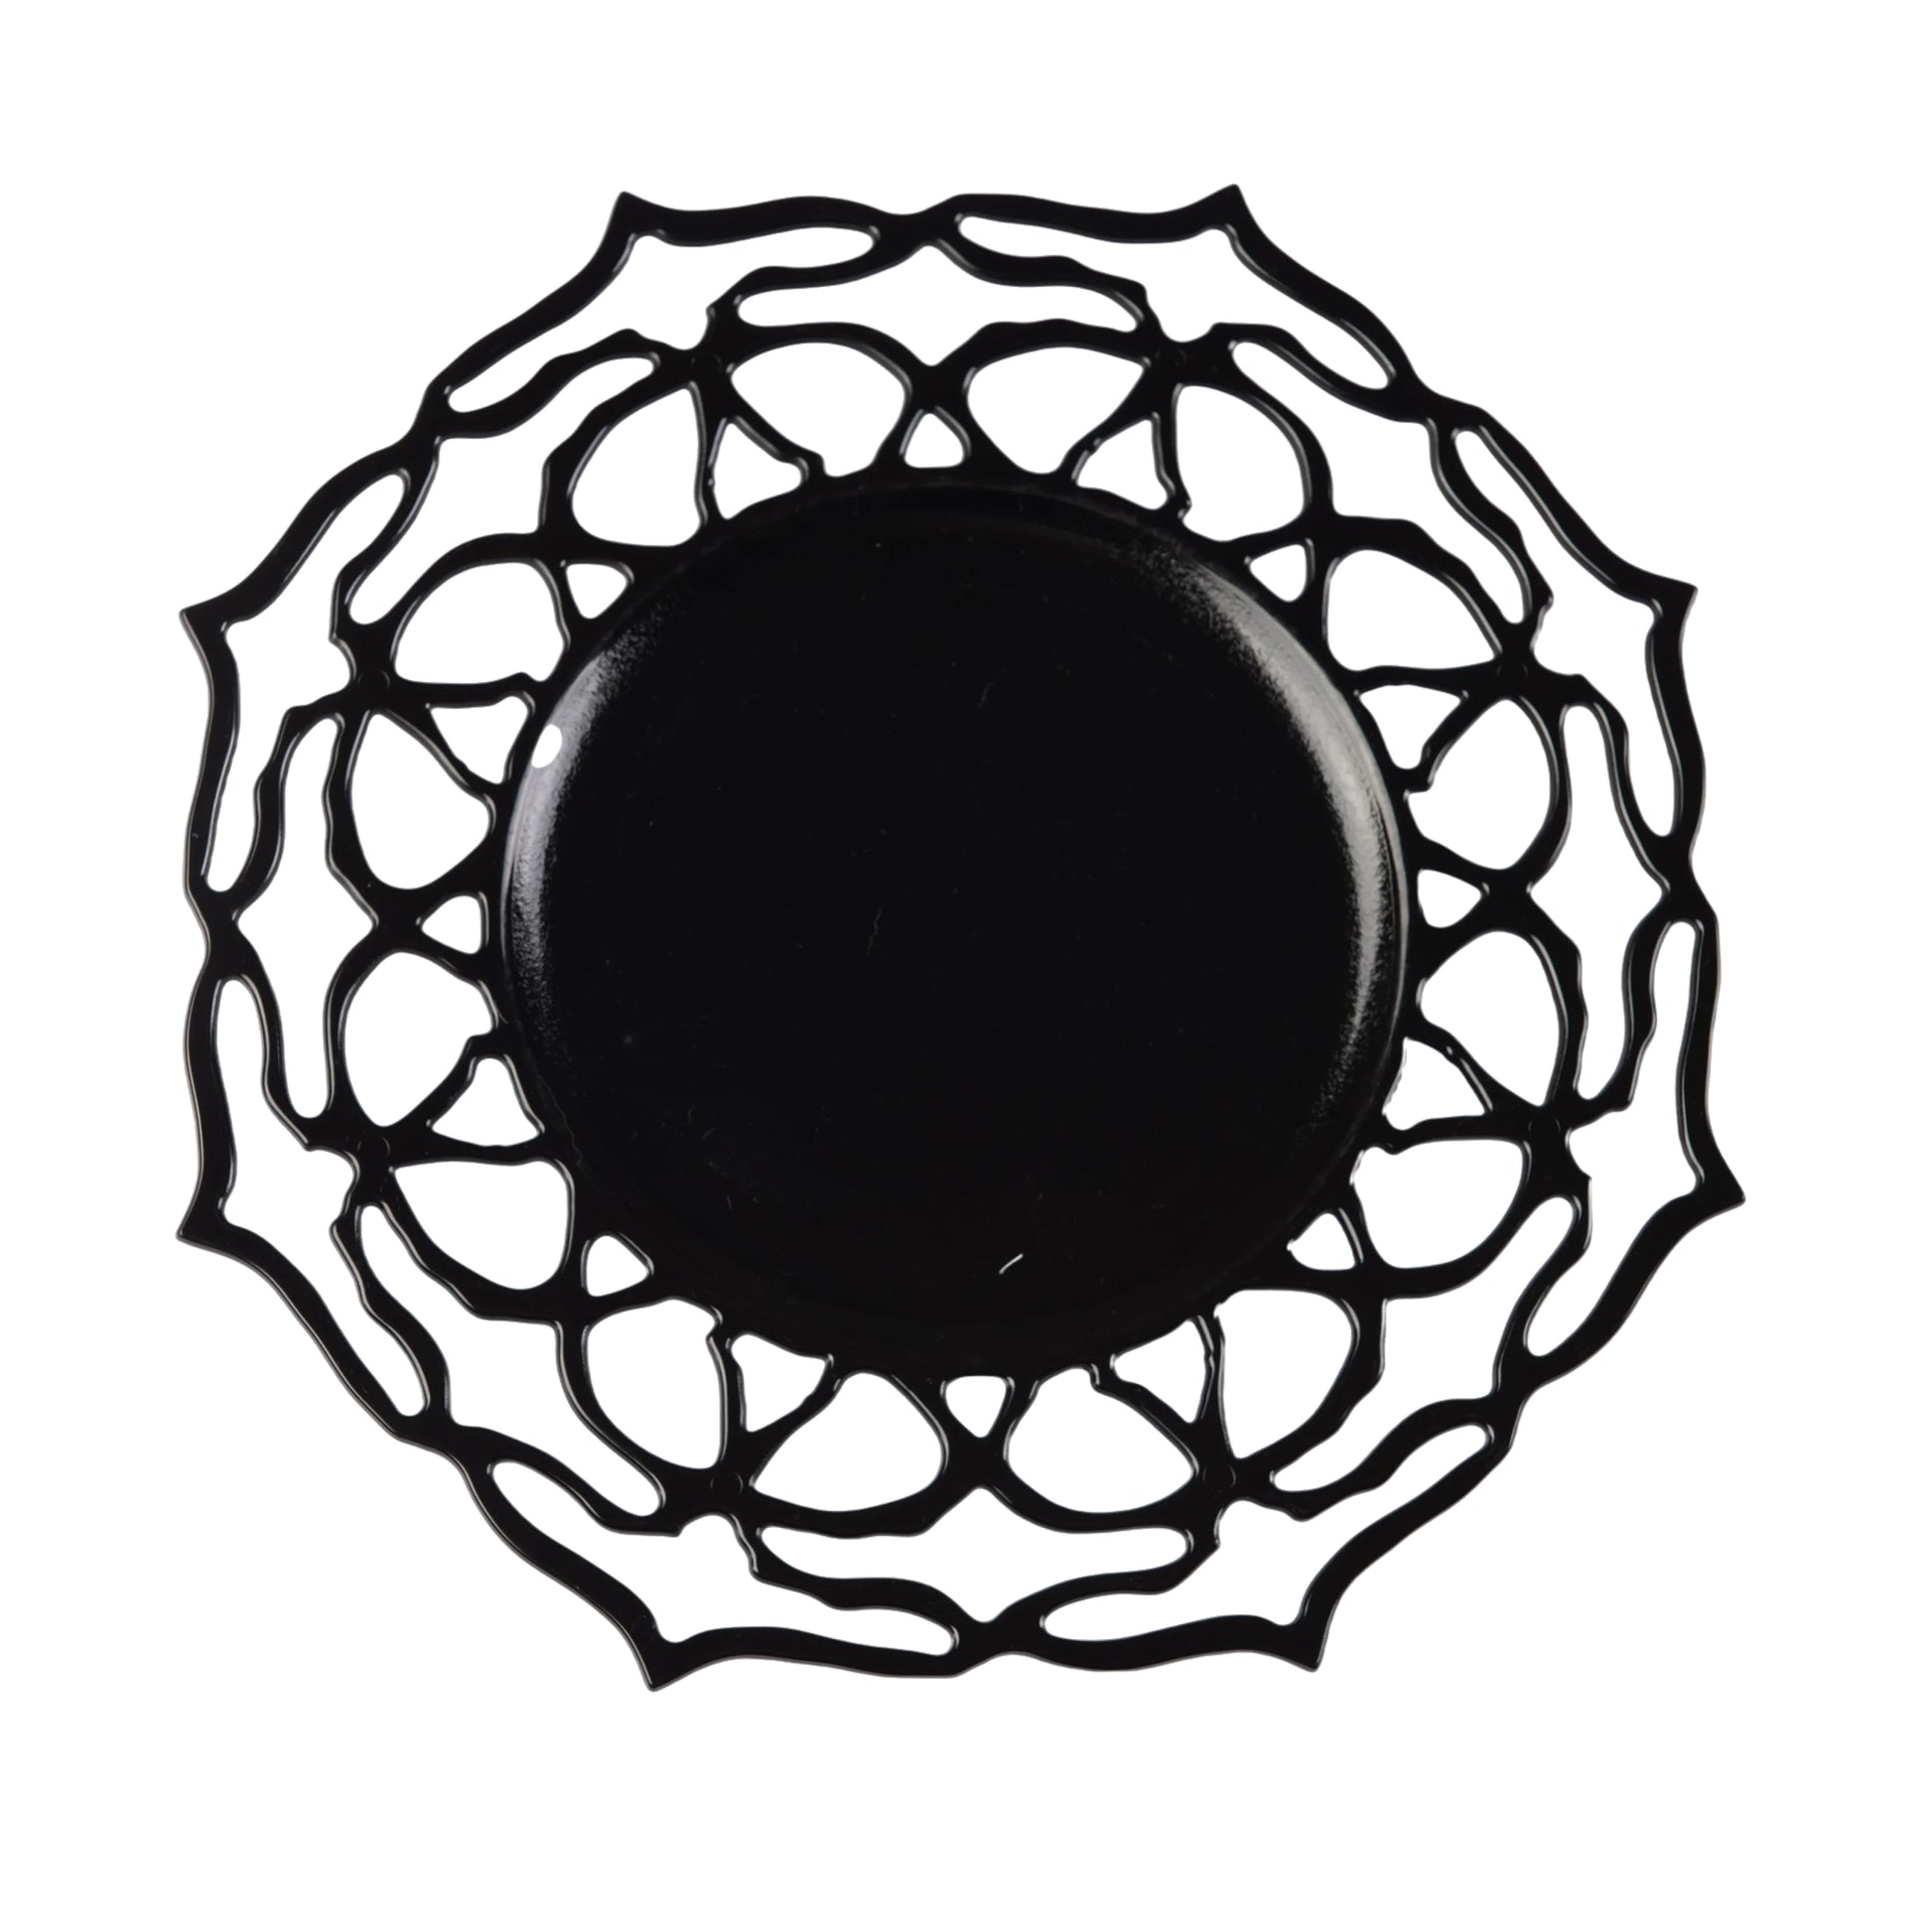 Acrylic Beaded 13 Round Charger Plate - Black Trim